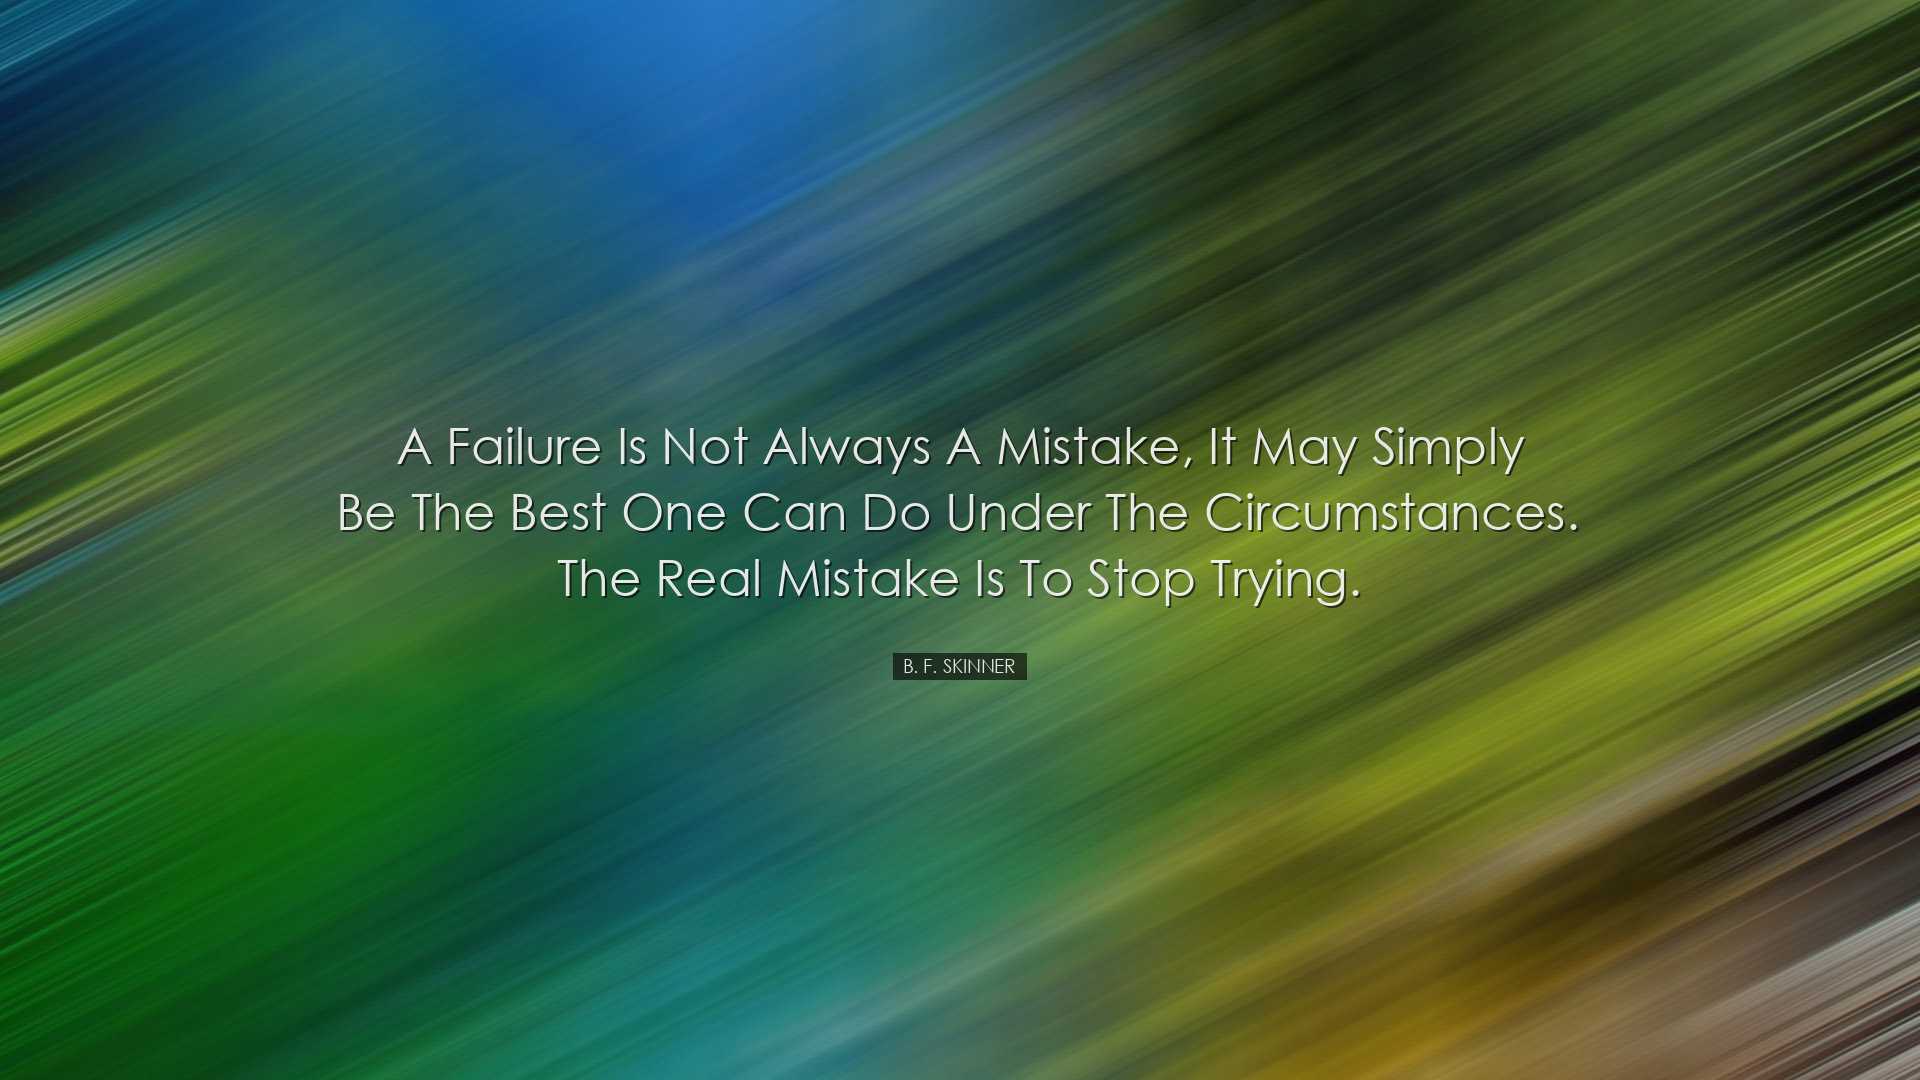 A failure is not always a mistake, it may simply be the best one c